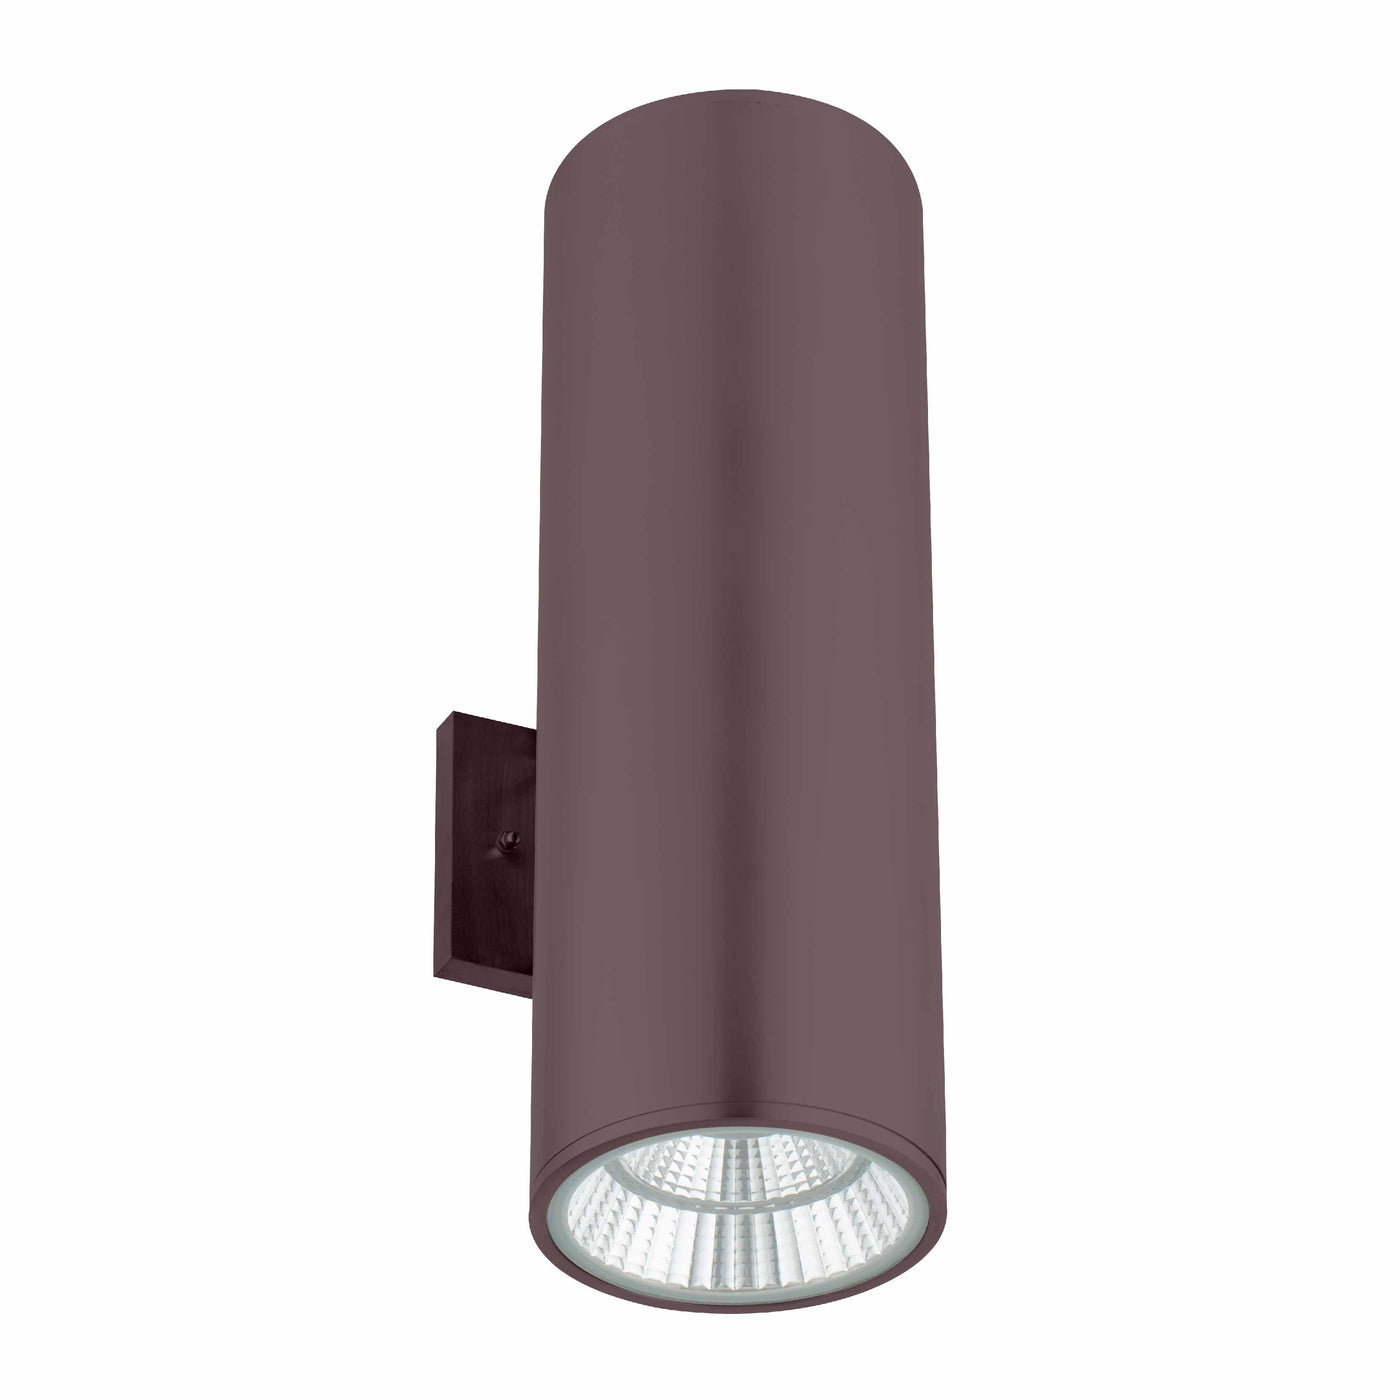 Large LED Cylinder Up/Downlight, 3200 Lumens, 40 Watt, 120 Volts, CCT Selectable 3000K/4000K/5000K, Available in Black, Bronze, Brushed Nickel, or White